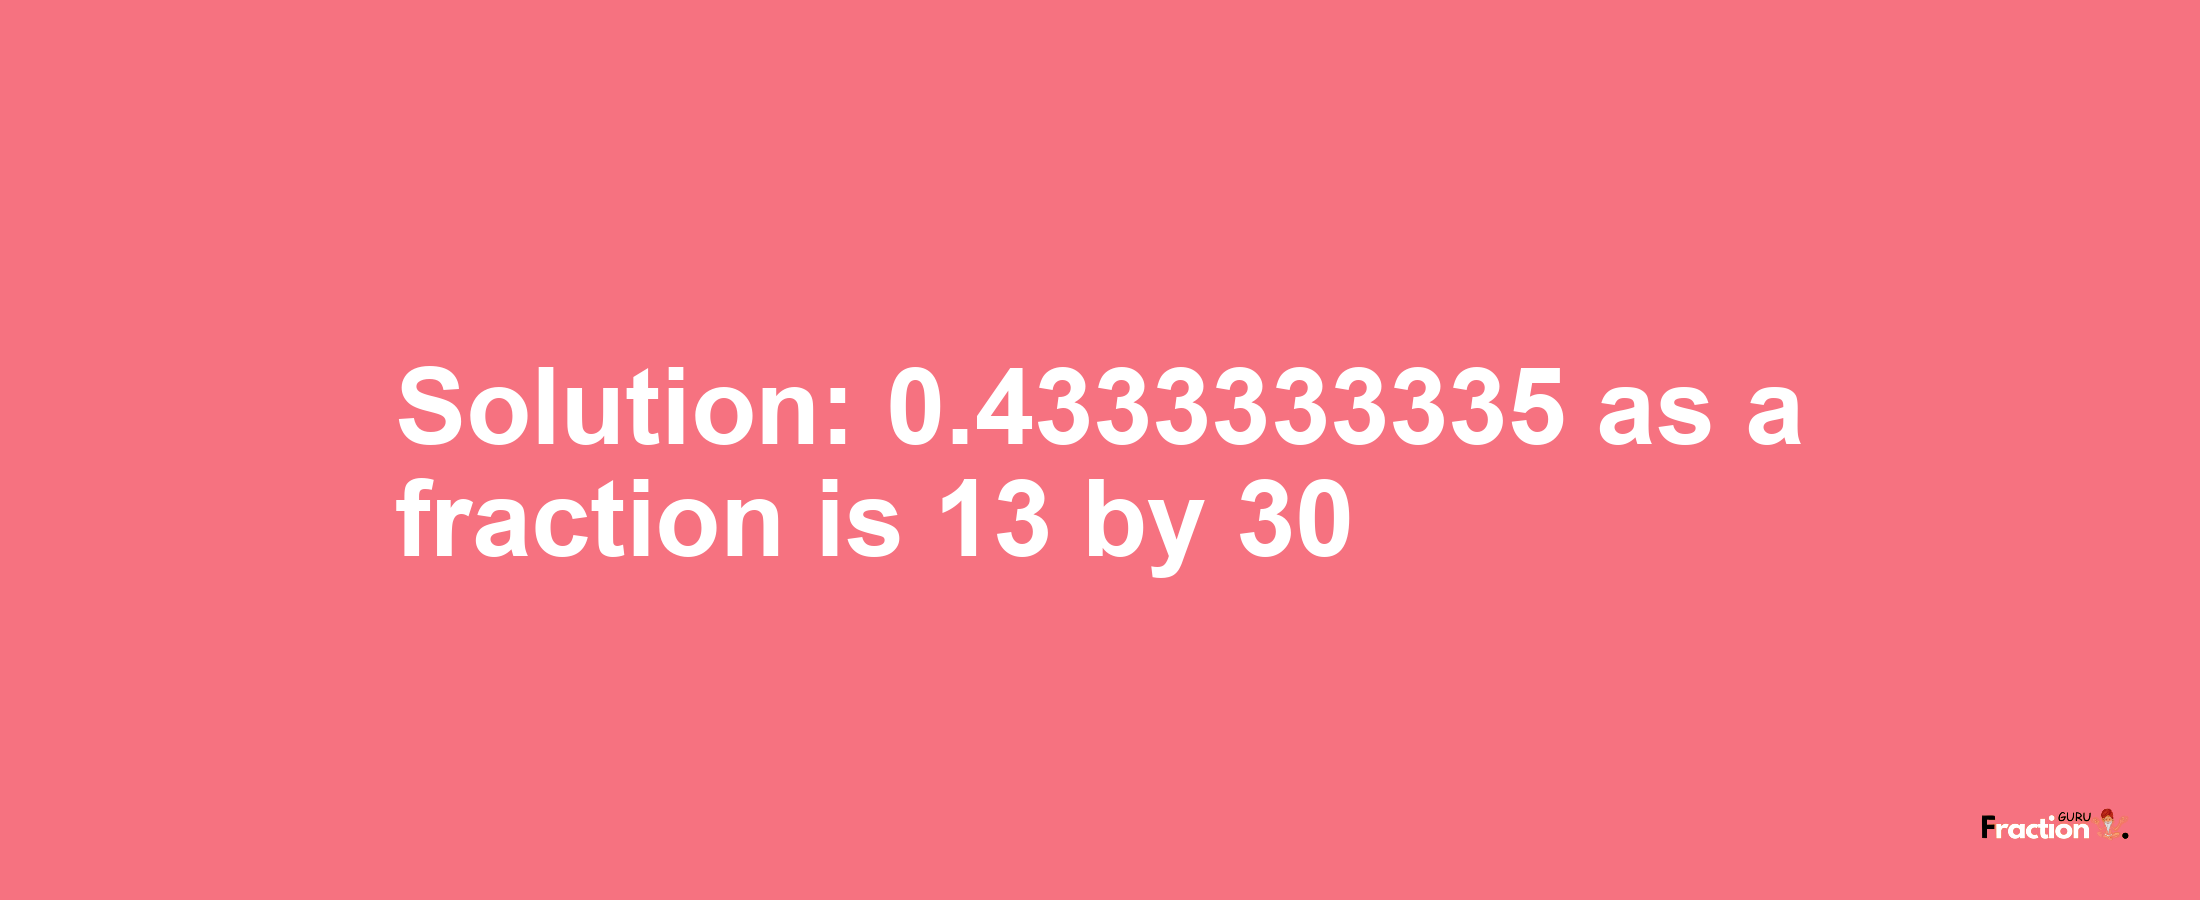 Solution:0.4333333335 as a fraction is 13/30